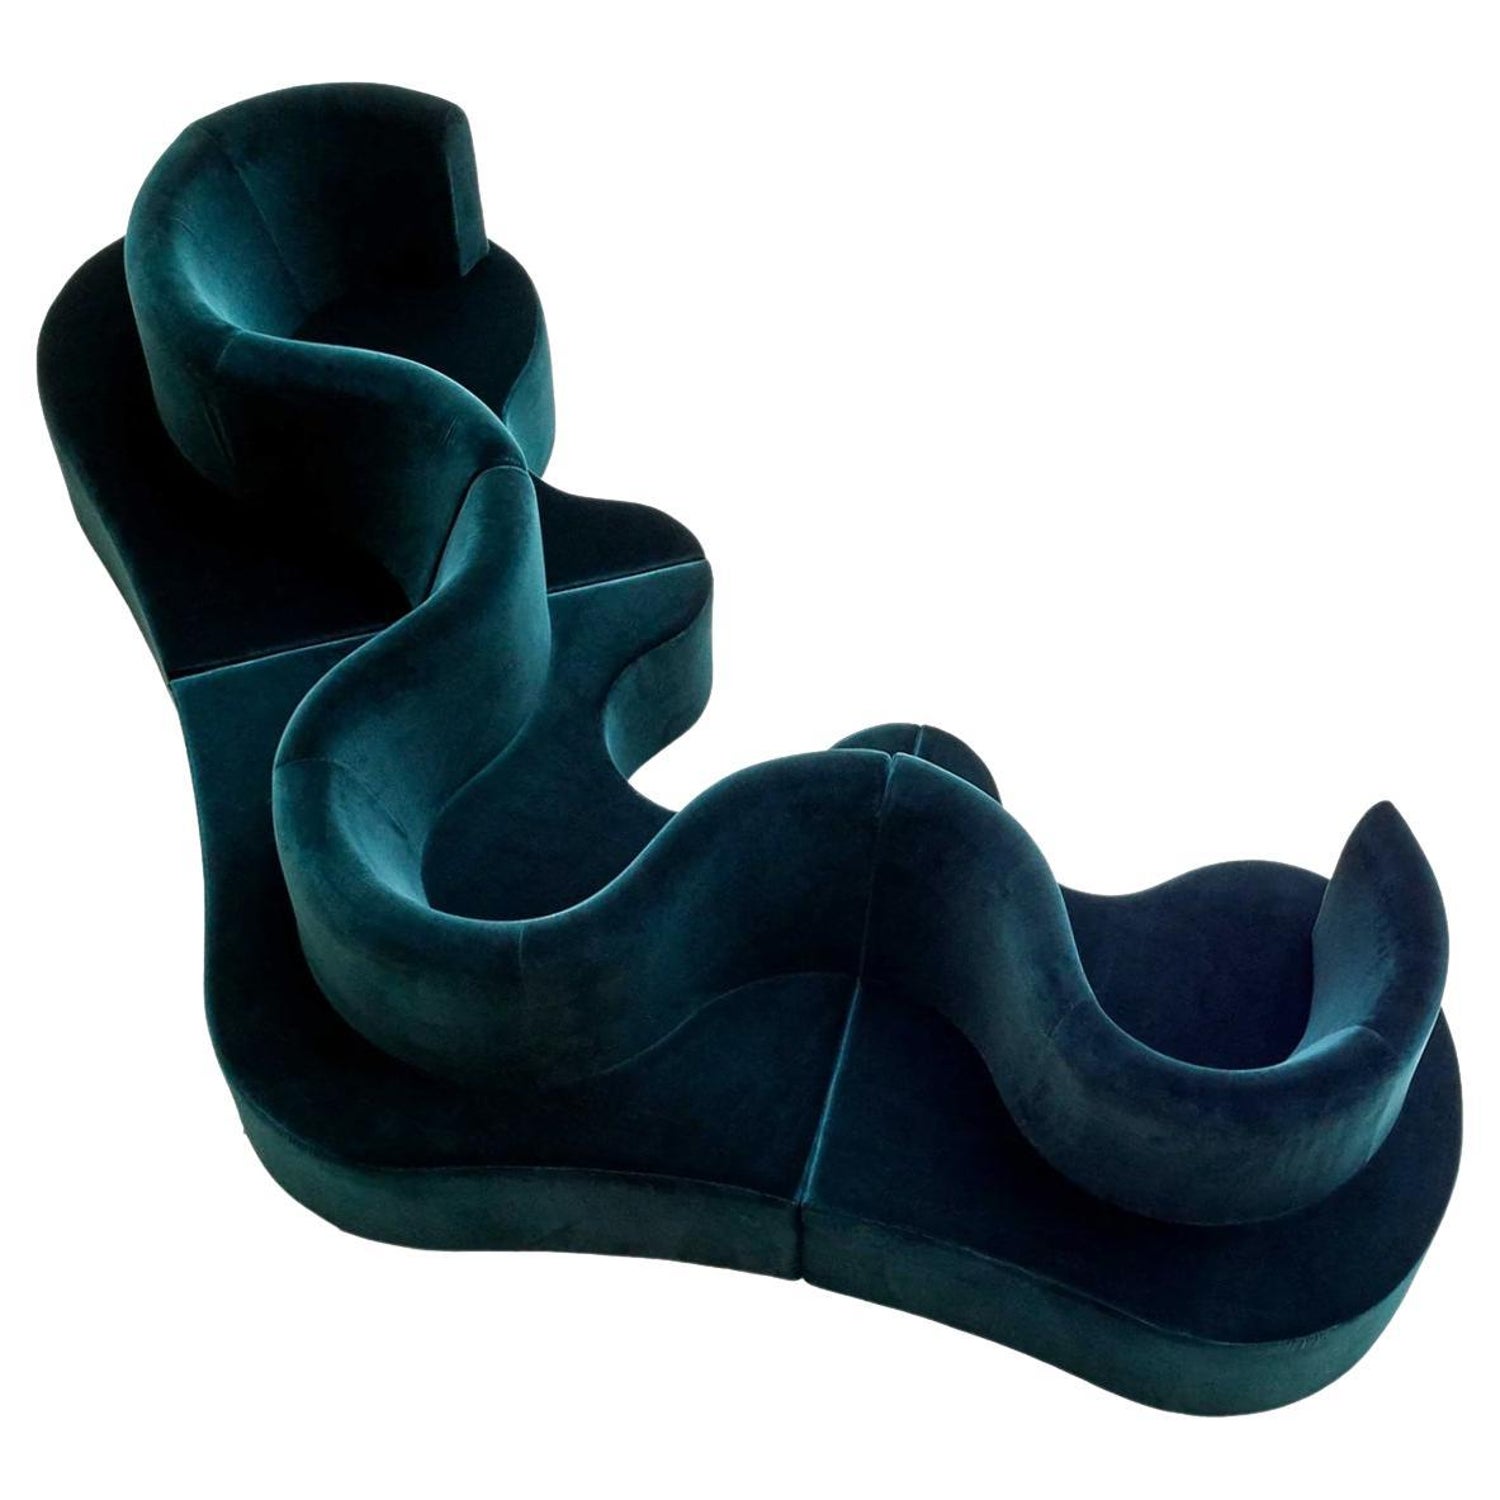 Verner Panton Sofas - 12 For Sale at 1stDibs | panton couch, adhd sofa tower, adhd sofa for sale